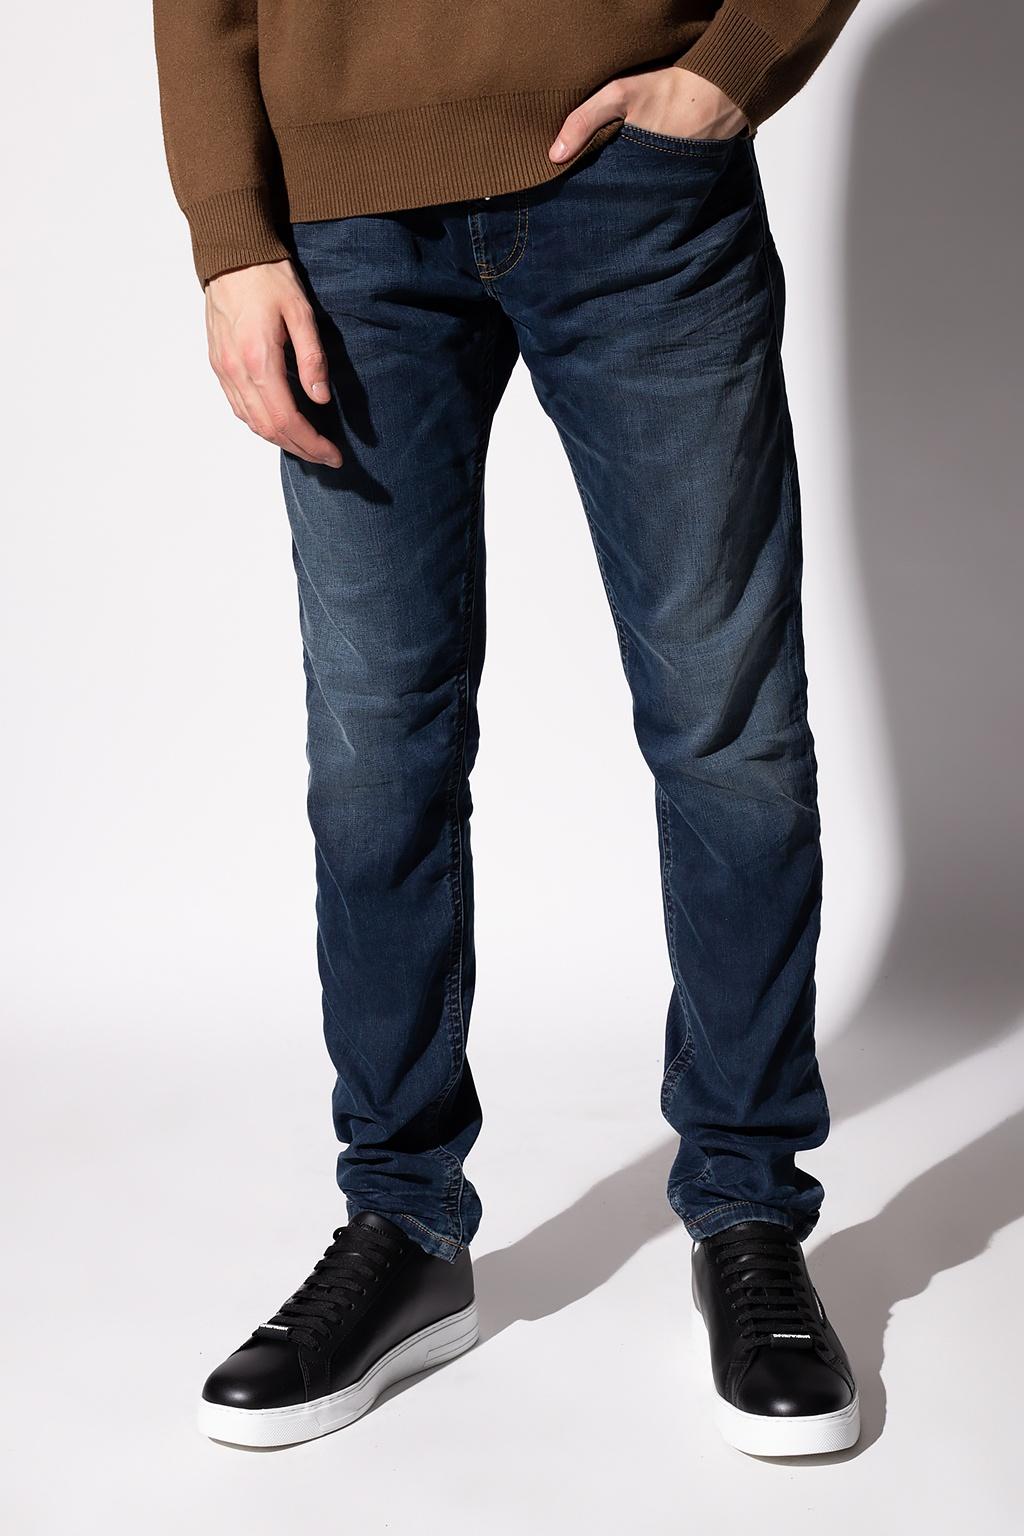 DIESEL Denim 'thommer jogg' Jeans With Gathers in Blue for Men - Lyst